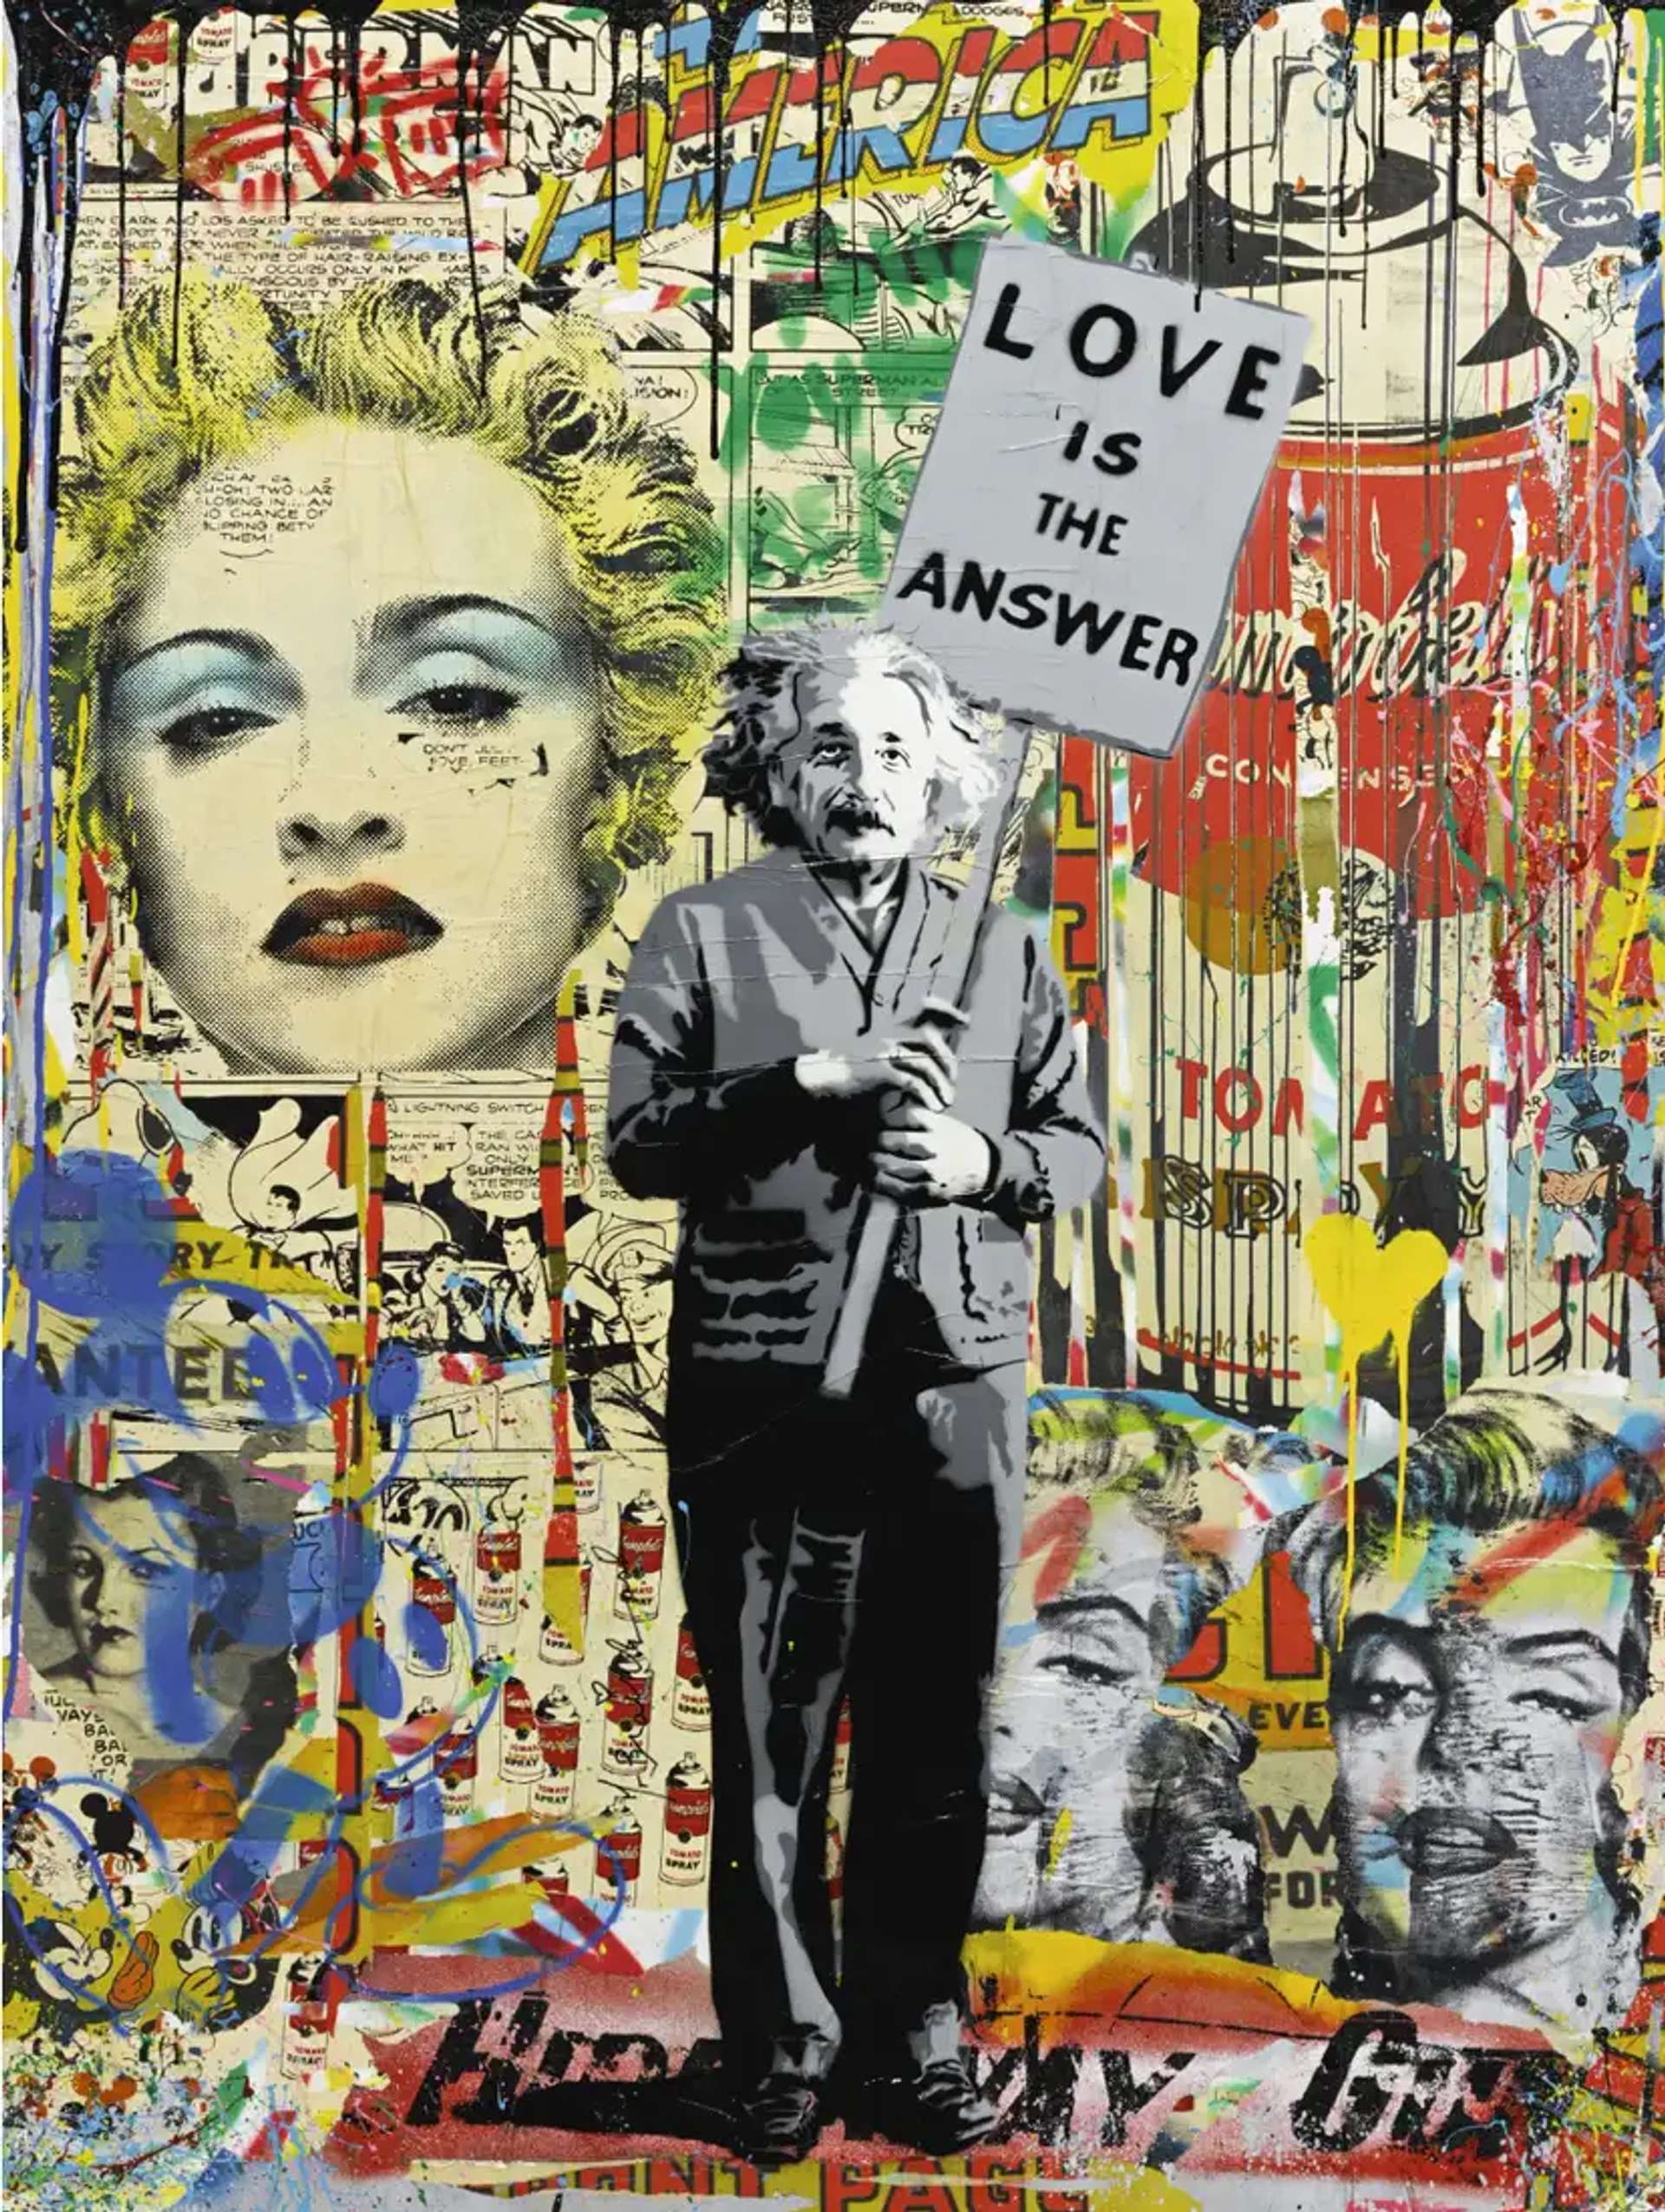 A black and white stencil depicting scientist Albert Einstein holding a picketed sign that reads 'LOVE IS THE ANSWER,' set against a graffiti-covered wall featuring collaged Campbell soup spray cans and Madonna portraits.